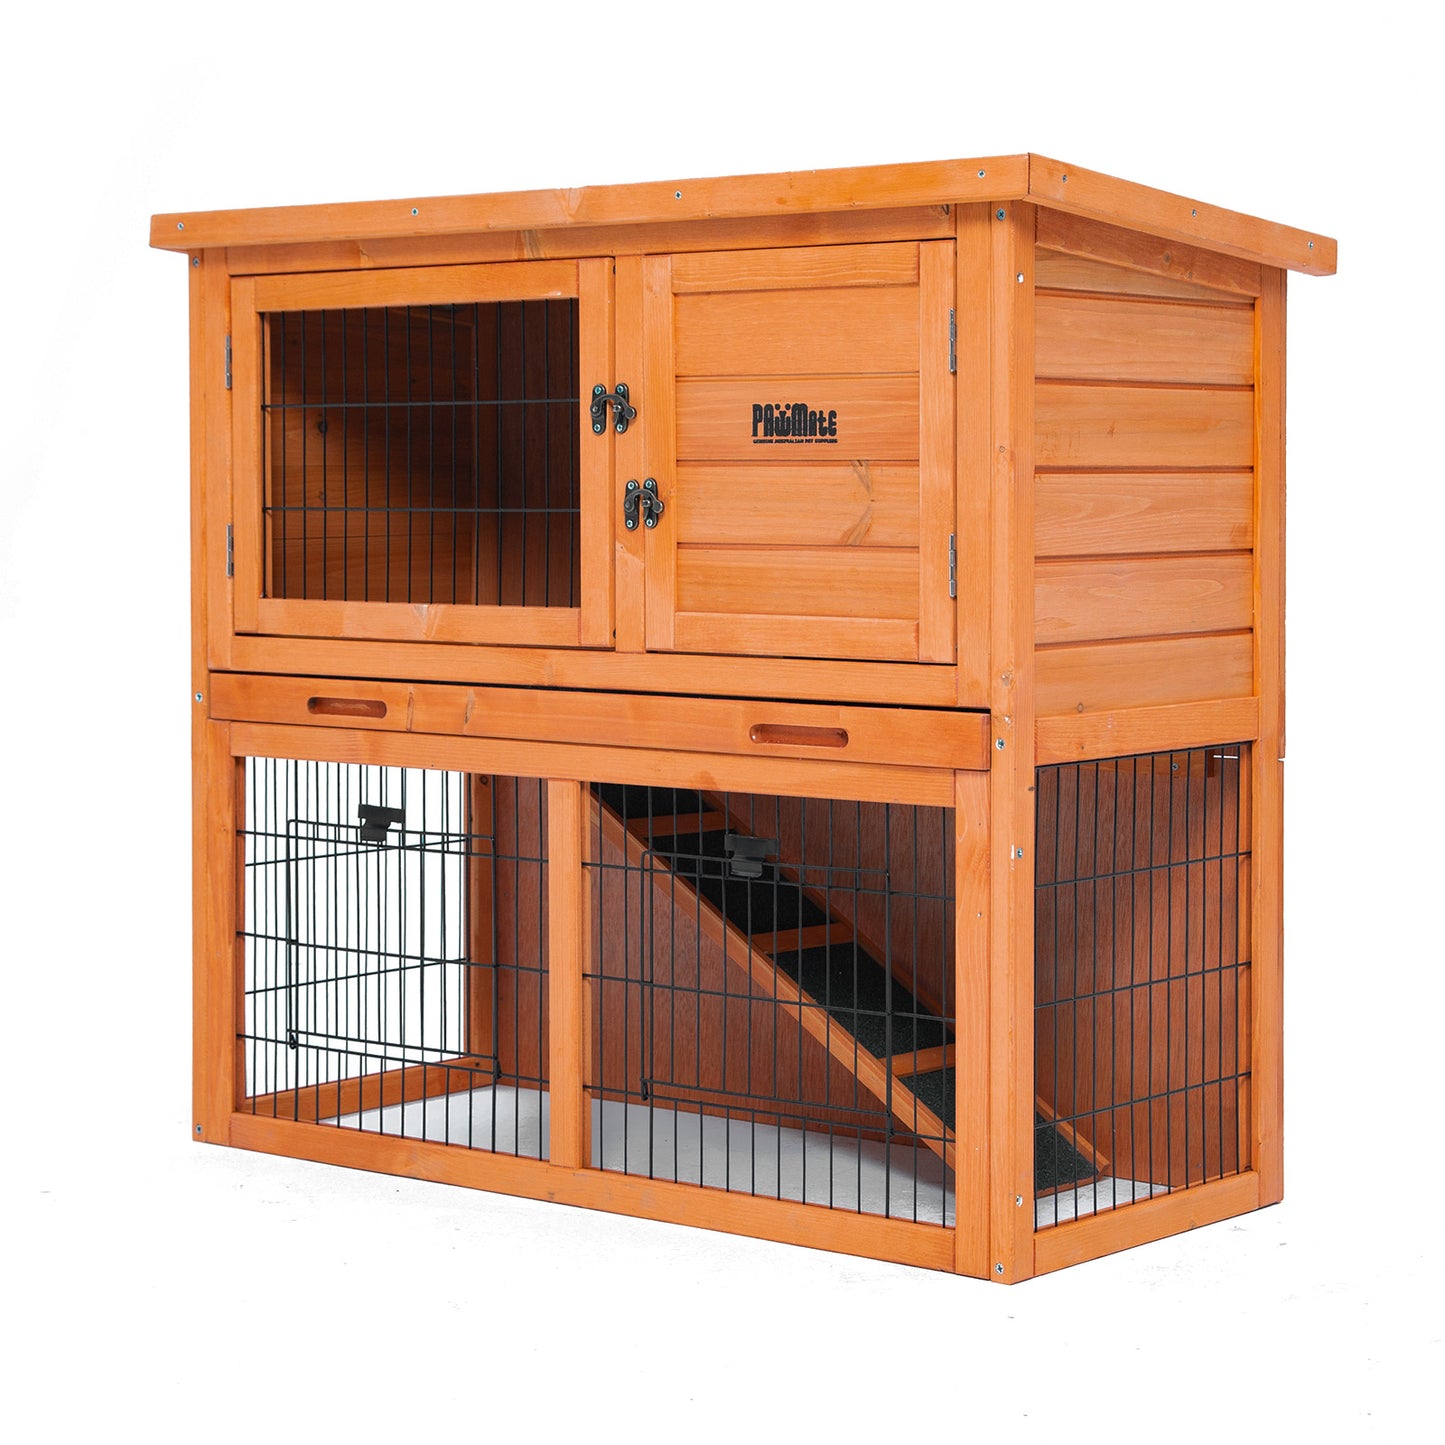 Paw Mate Rabbit Hutch House Coop Aria 2 Storey Wooden Chicken Guinea Pig Cage